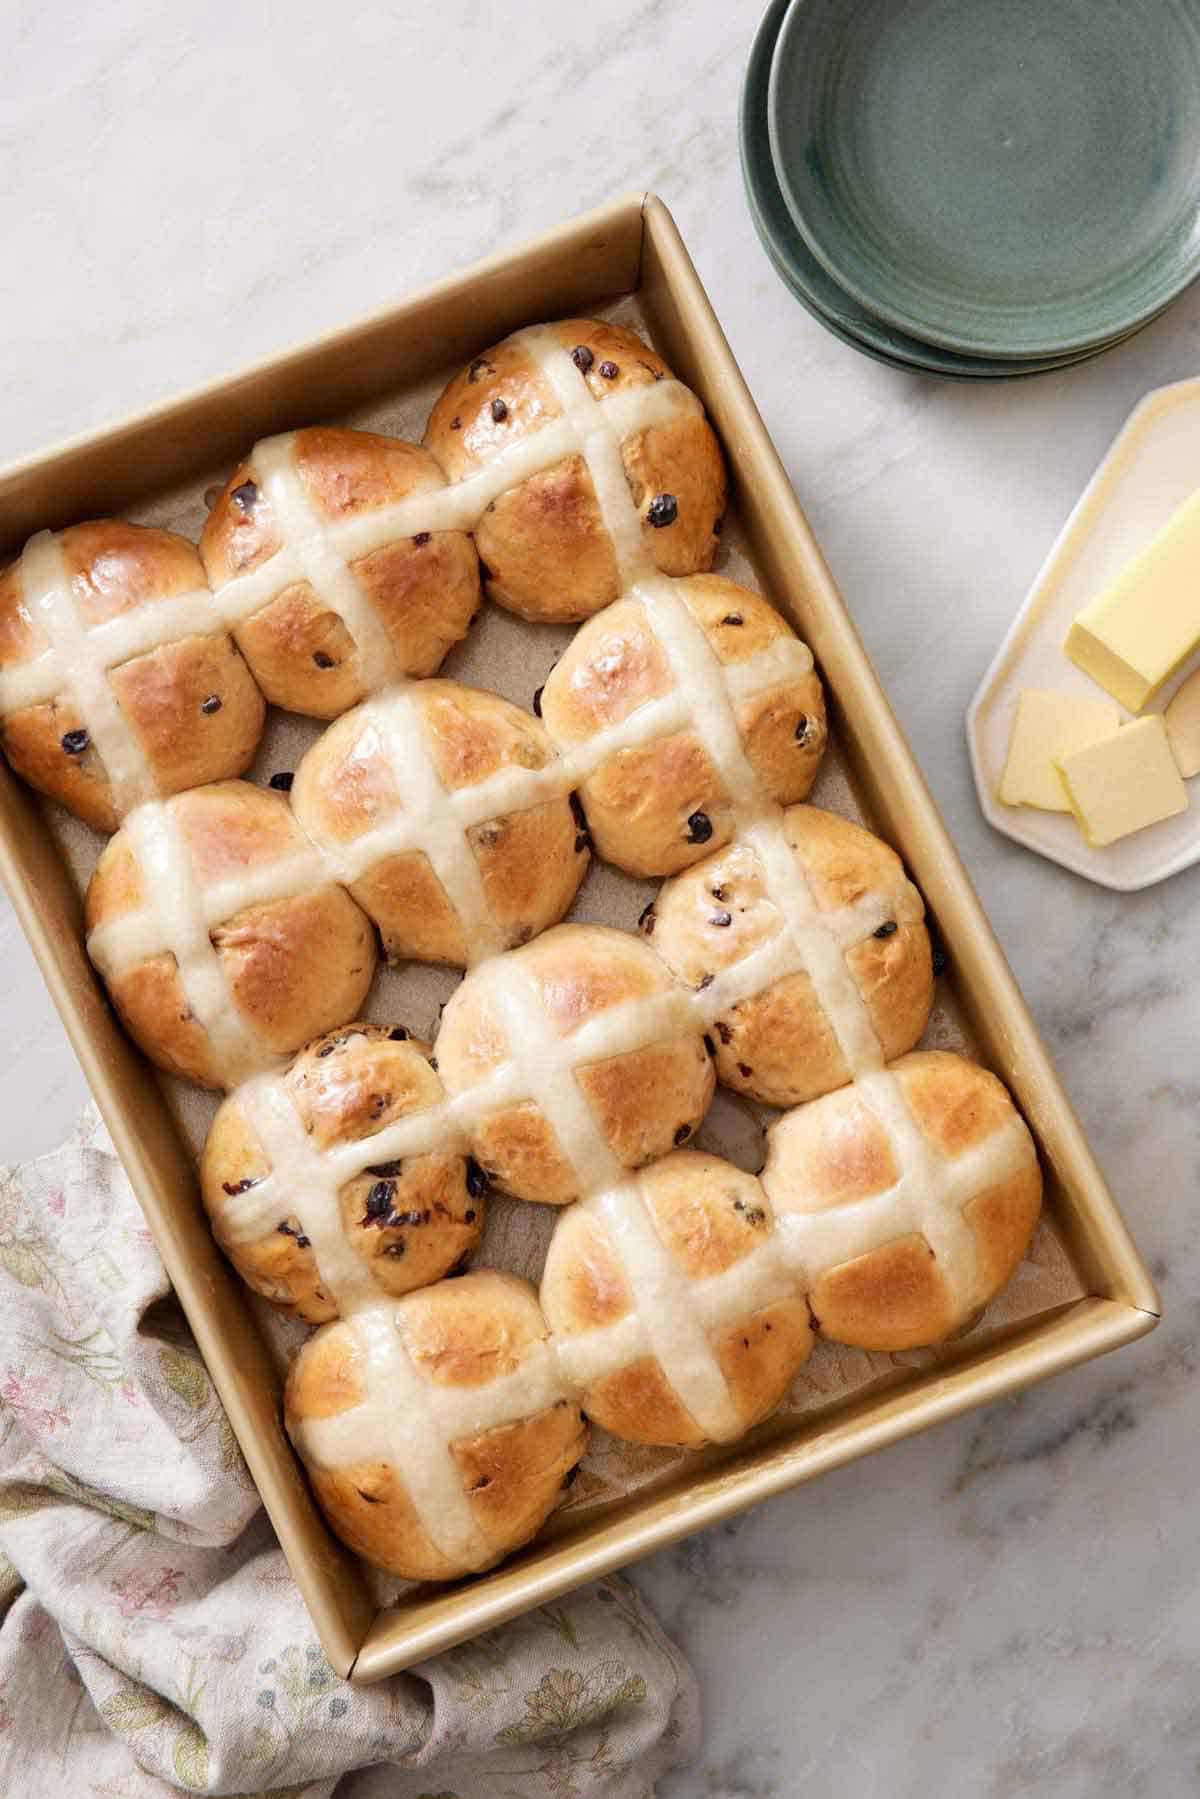 Overhead view of hot cross buns in a baking dish. Plates and butter on the side.